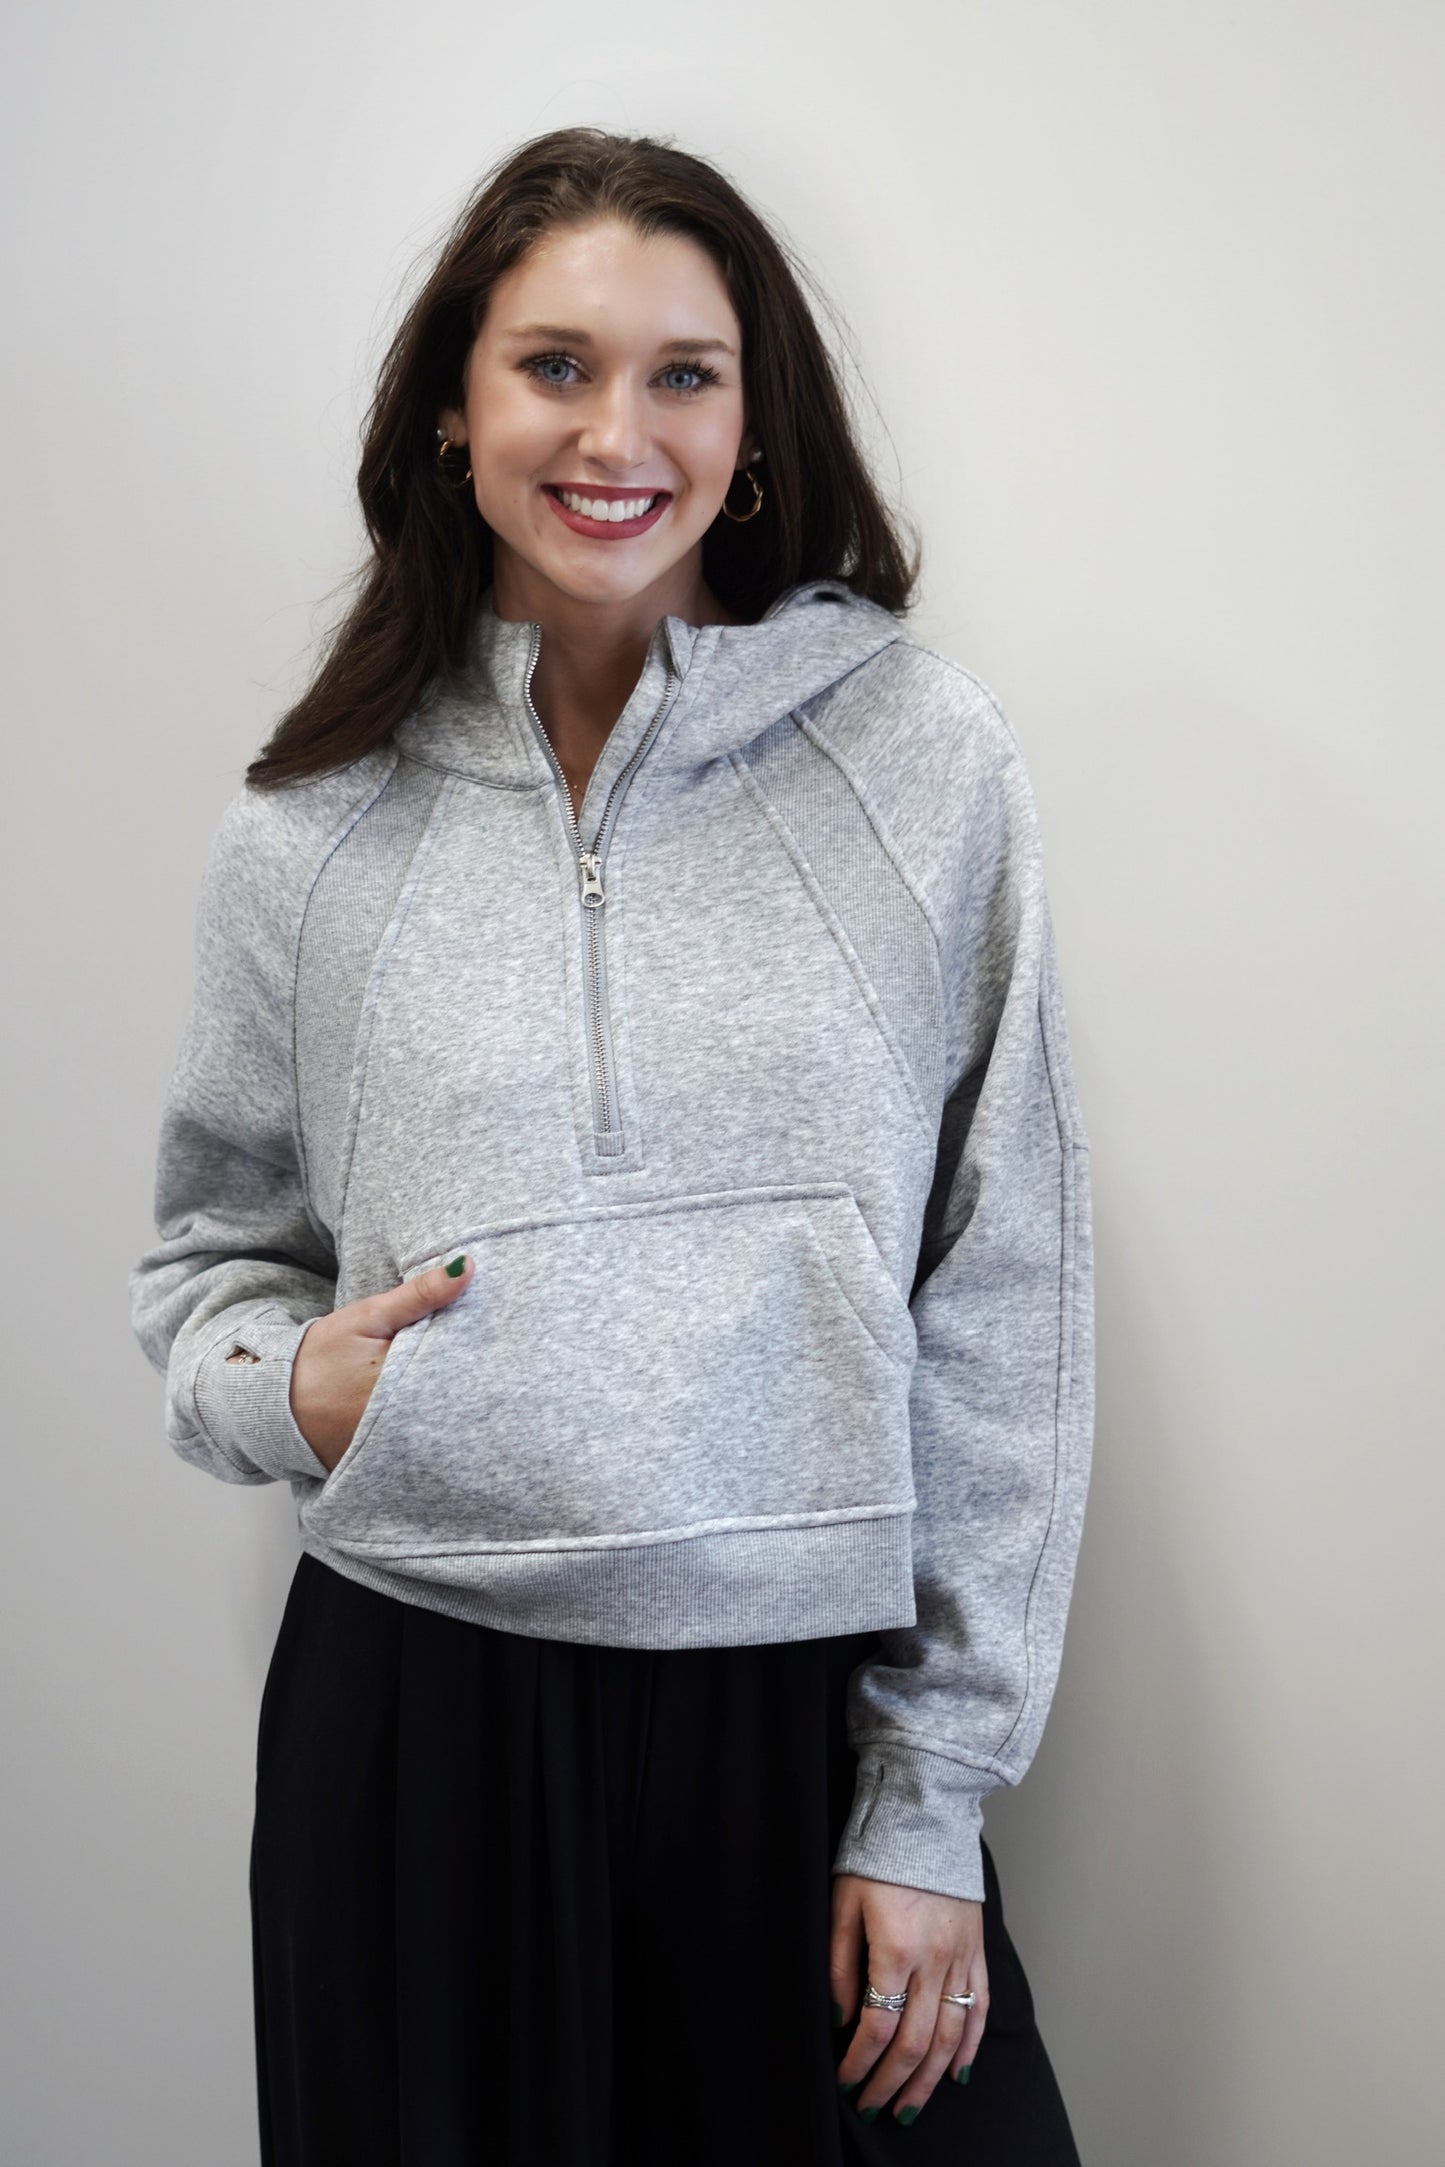 Sarah Scuba Hooded Sweatshirt Quarter Zip Long Cuffed Sleeves Kangaroo Pocket Colors: Heather Grey,  Skimmer Length Relaxed Fit 70% Polyester, 30% Cotton